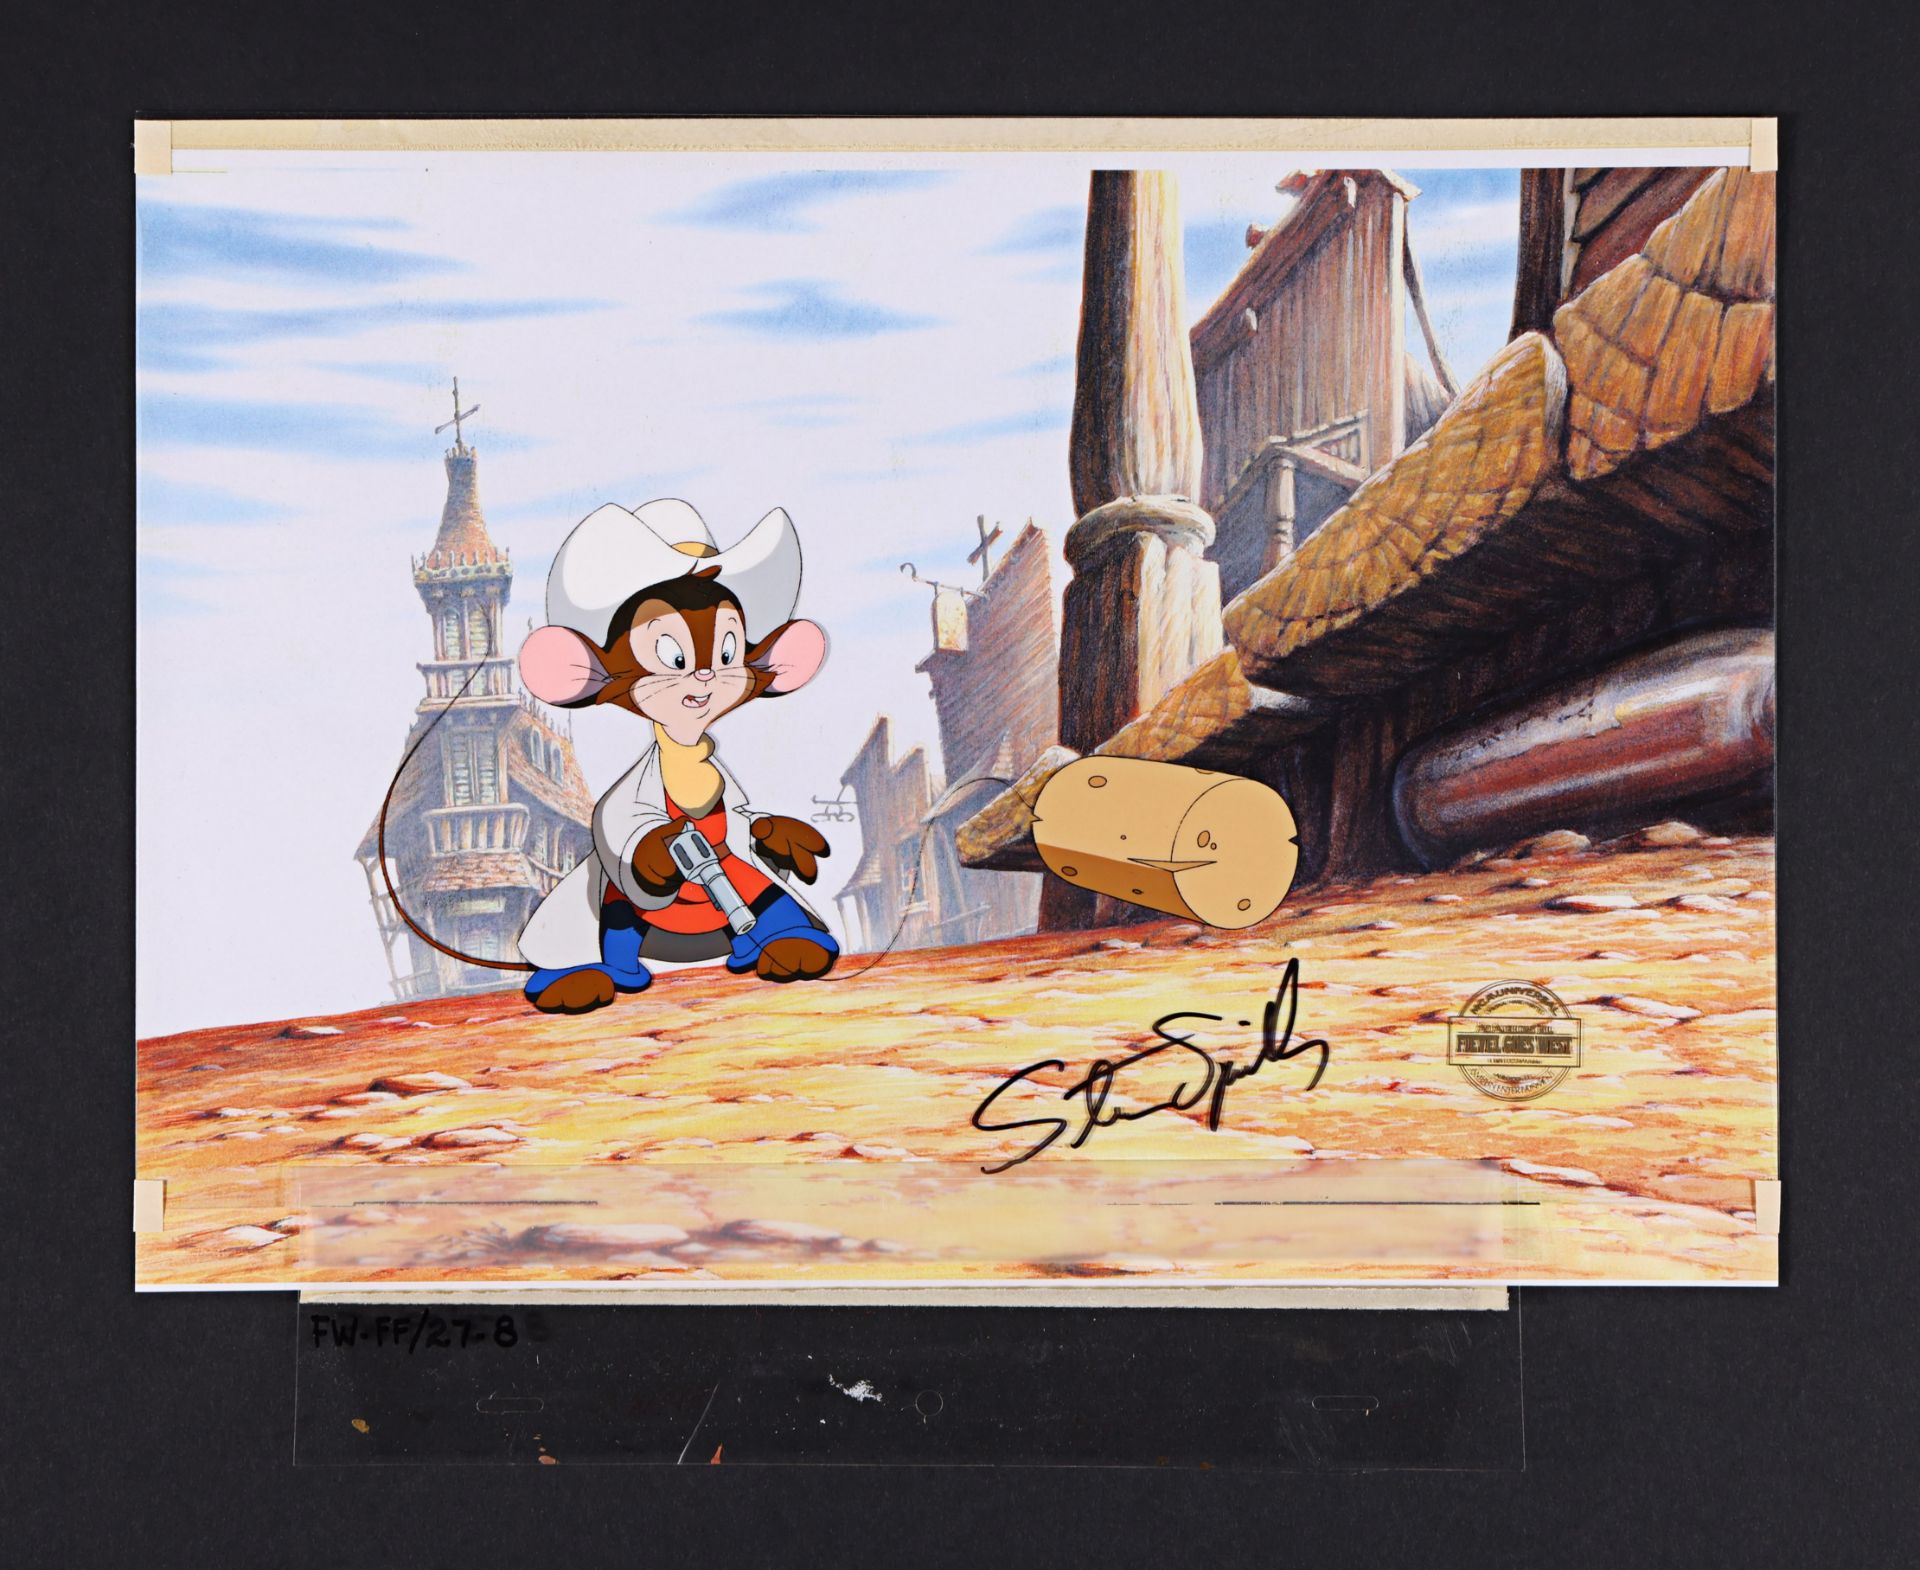 AN AMERICAN TAIL: FIEVEL GOES WEST (1991) - Steven Spielberg Autographed Original Hand-Painted Fieve